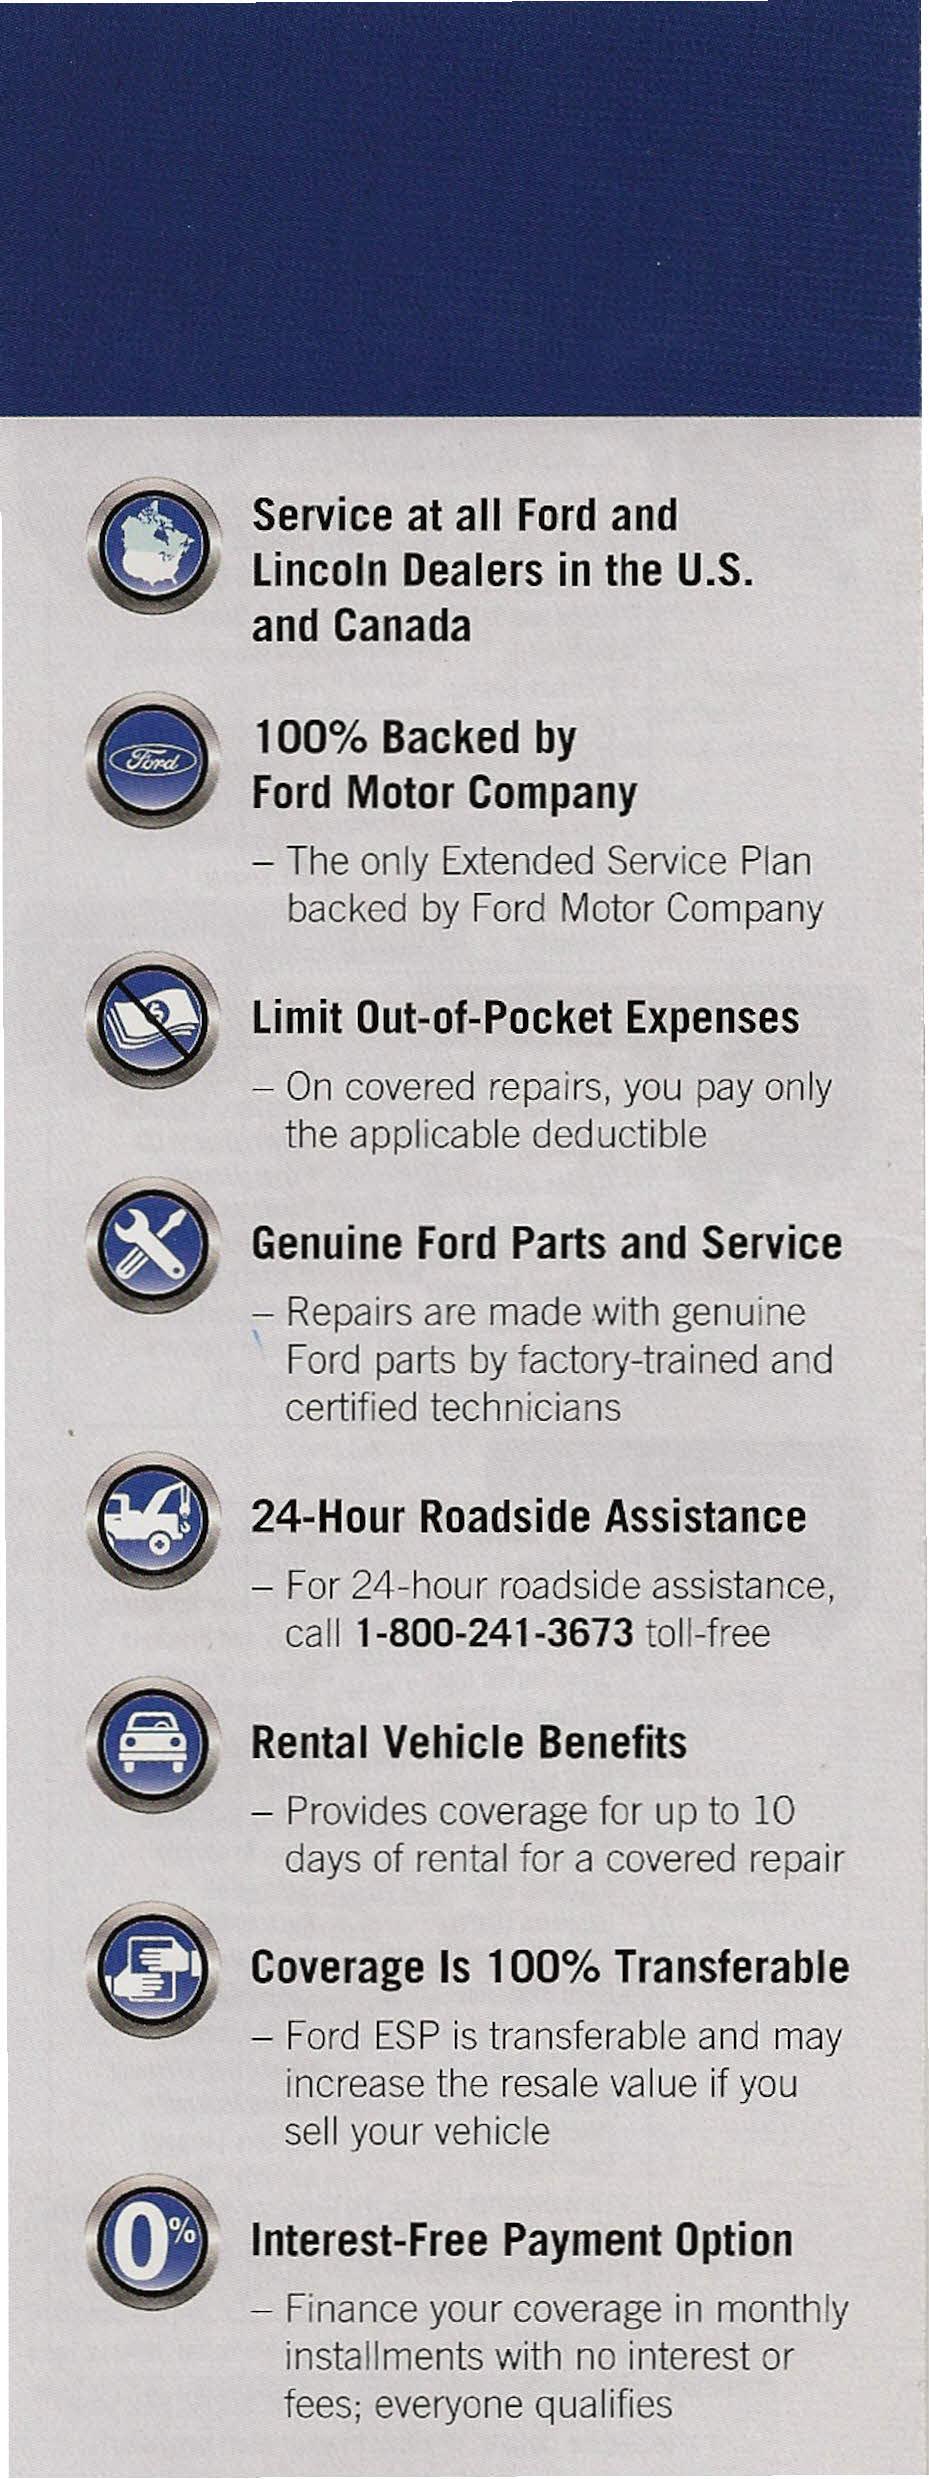 Service at all Ford and Lincoln Dealers in the U.S. and Canada 100% Backed by Ford Motor Company - The only Extended Service Plan backed by Ford Motor Company Limit Out-of-Pocket Expenses - On